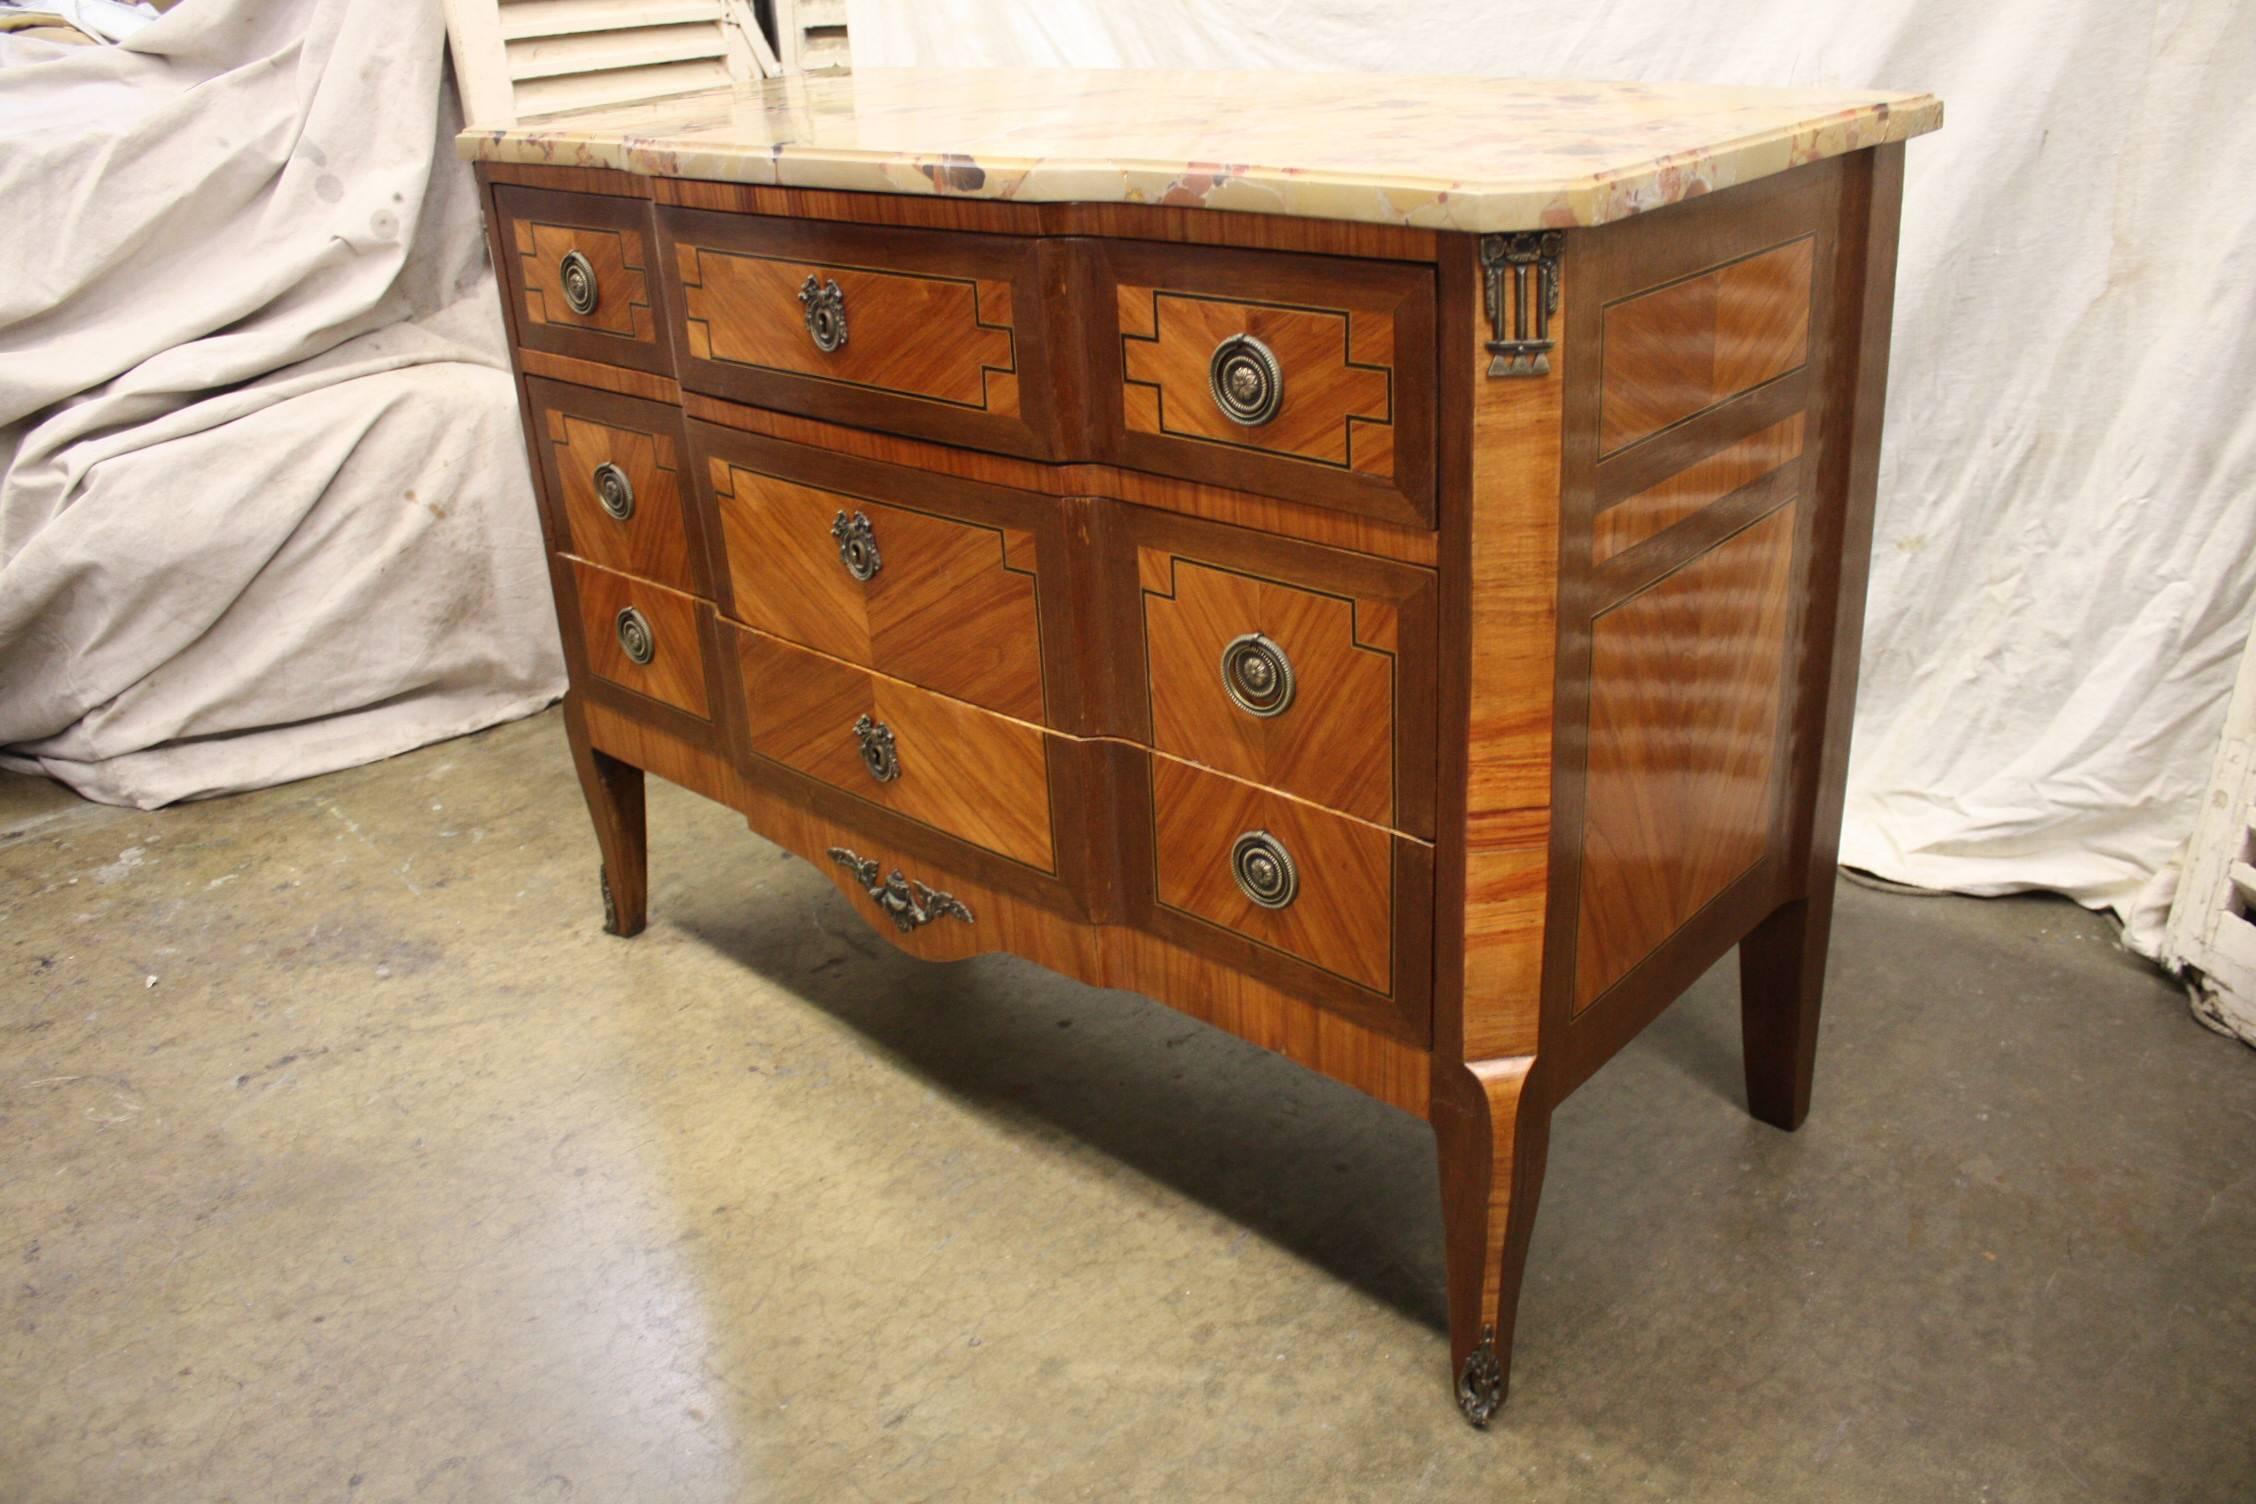 Magnificent French transition chest, Louis XV or Louis XVI style, very elegant with a Brecht marble top.